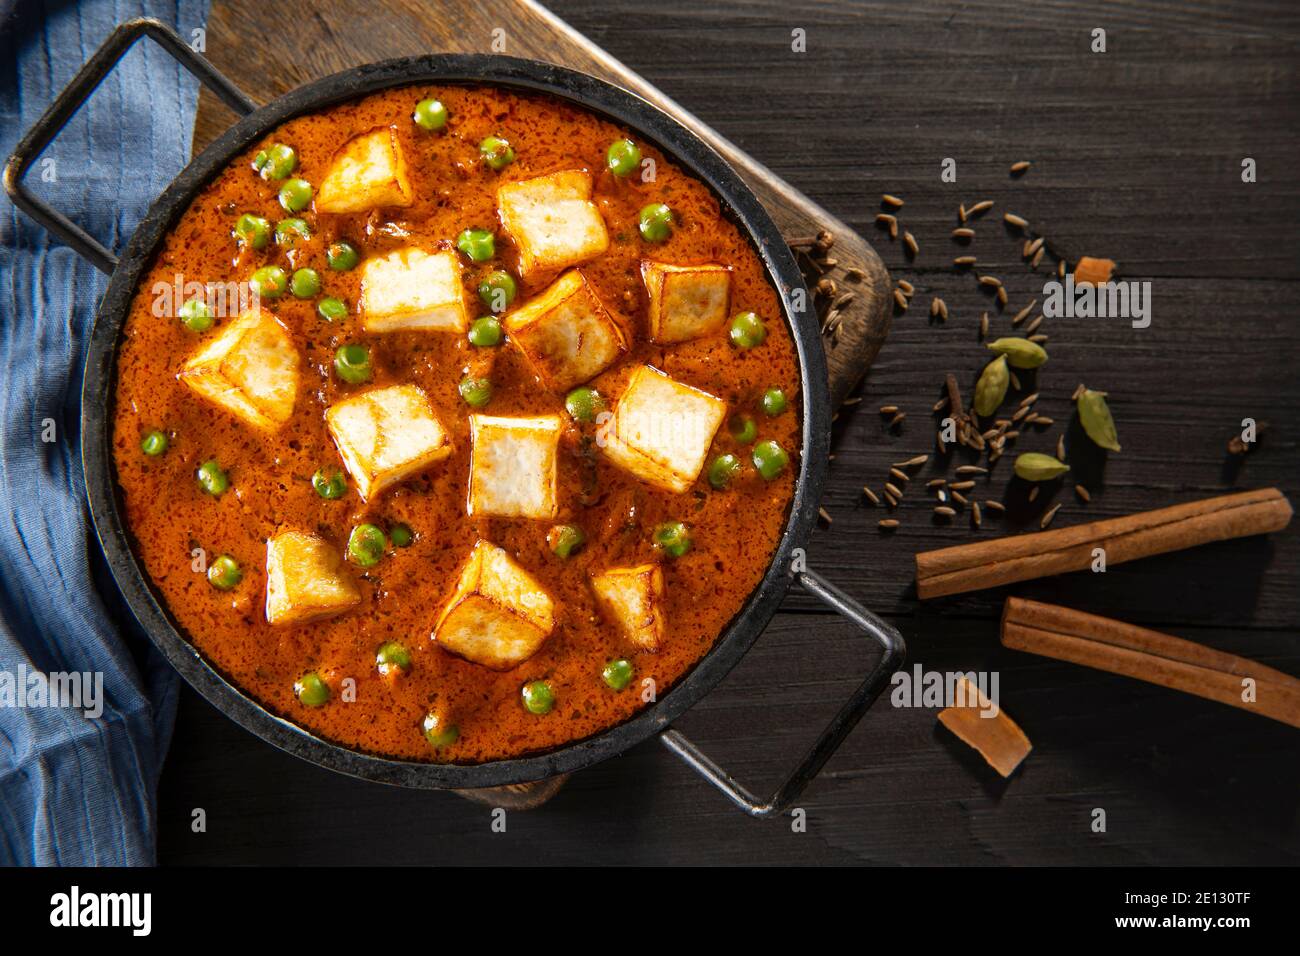 Mattar Paneer or cottage cheese with Peas. A vegetarian Indian delicacy Stock Photo